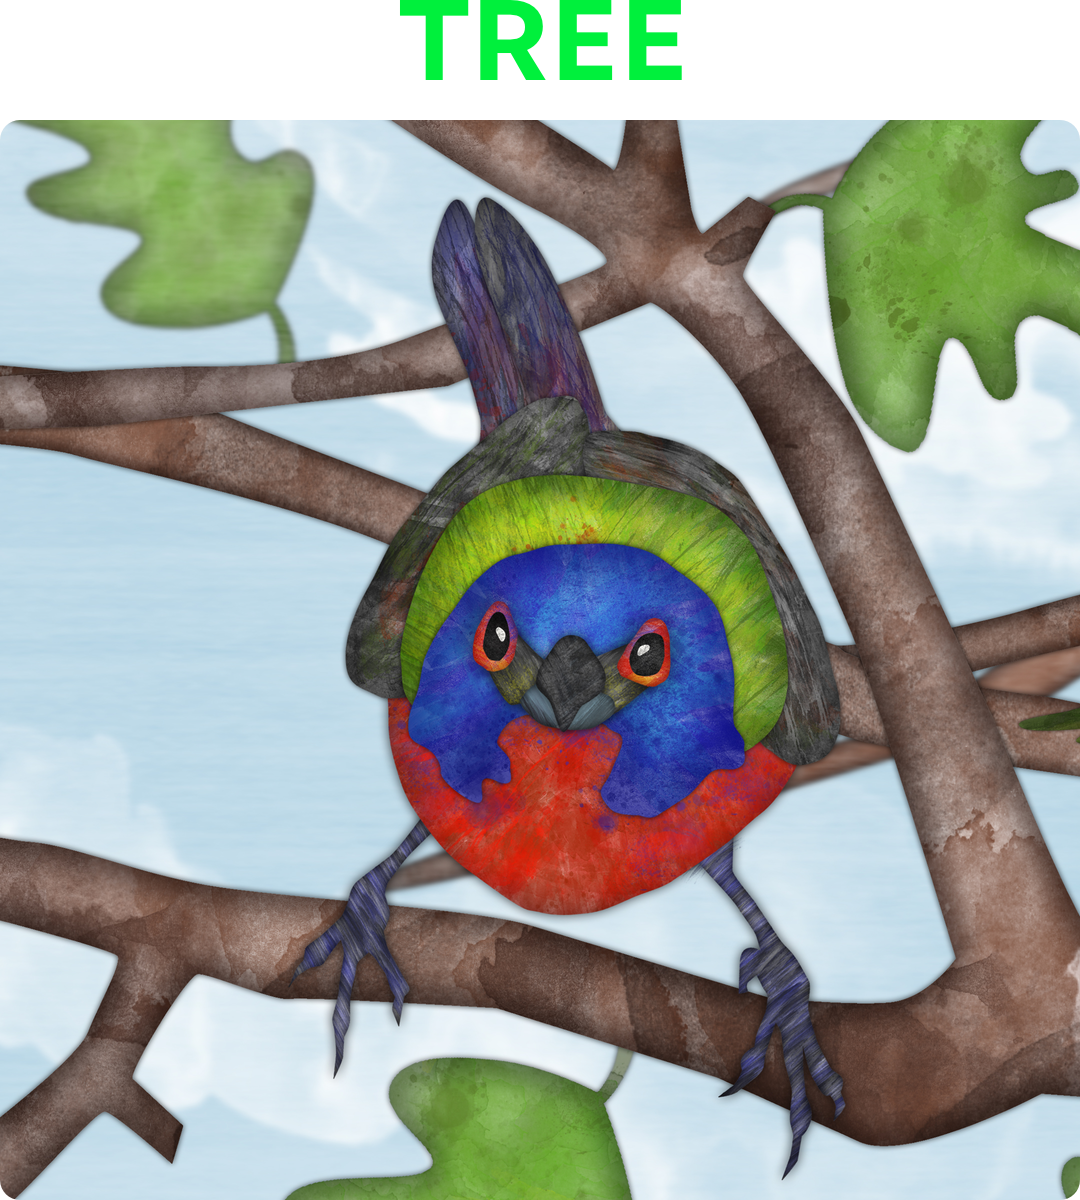 A digital painting of a colourful bird on a tree branch looking straight at the viewer and you know it is taking no shit from anyone.